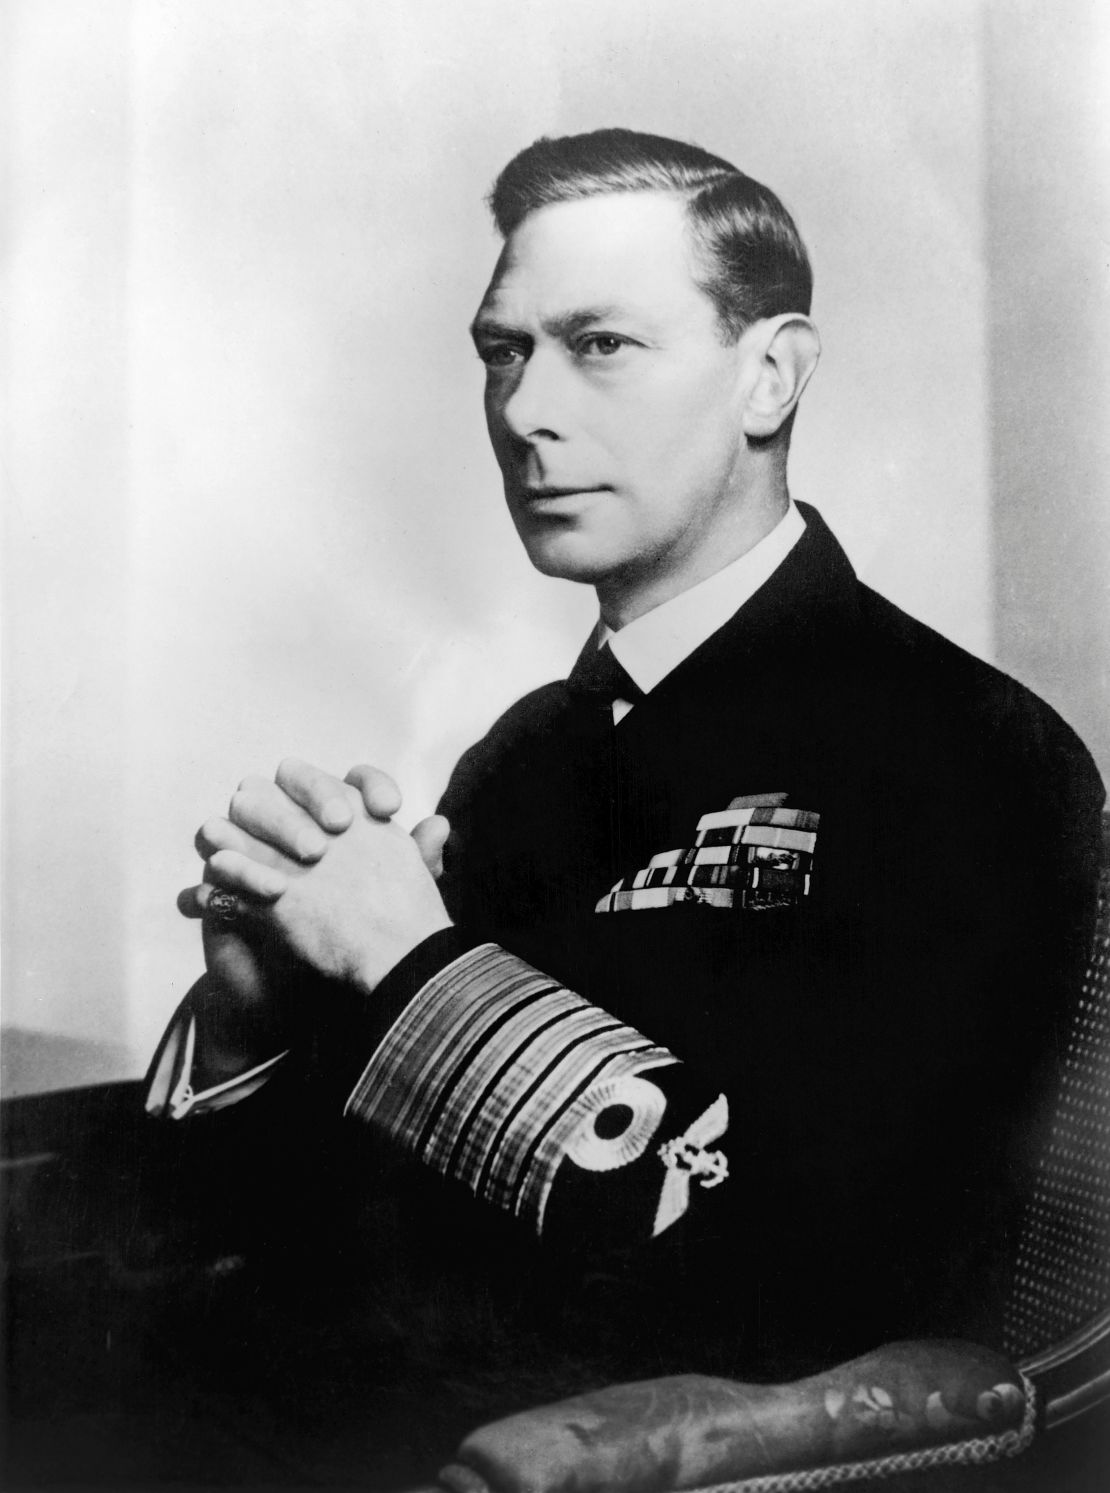 An undated photograph of King George VI.